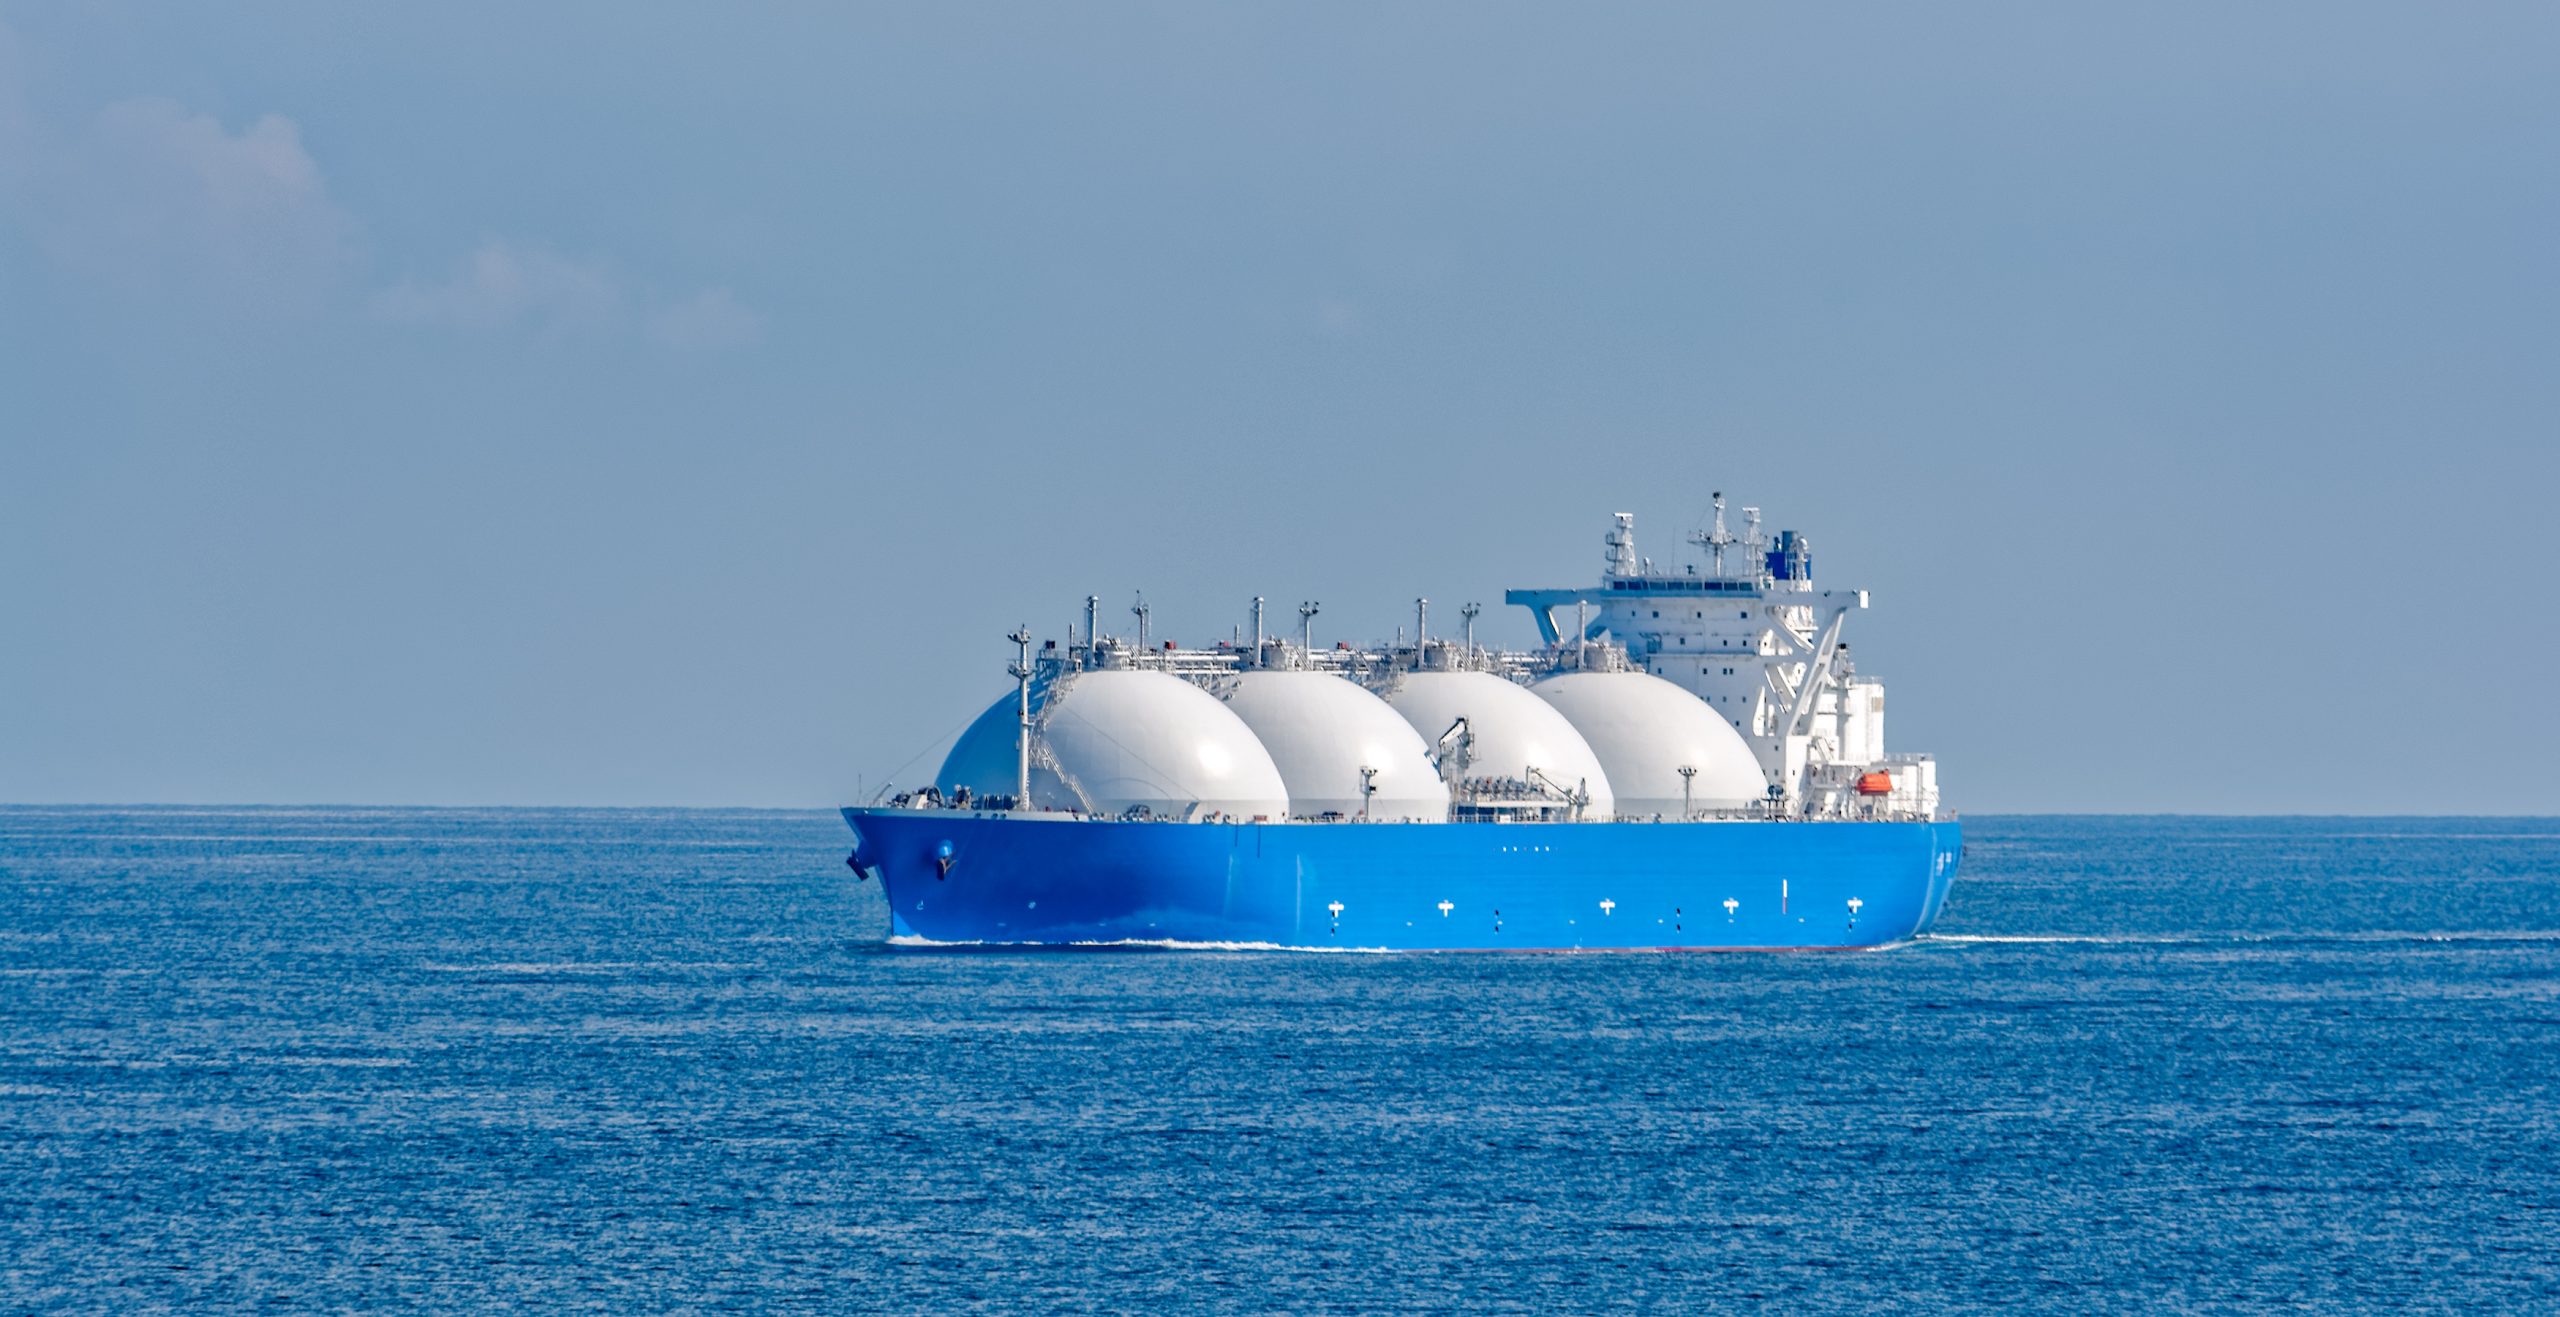 LNG: A step forward in reducing fuel emissions, or not